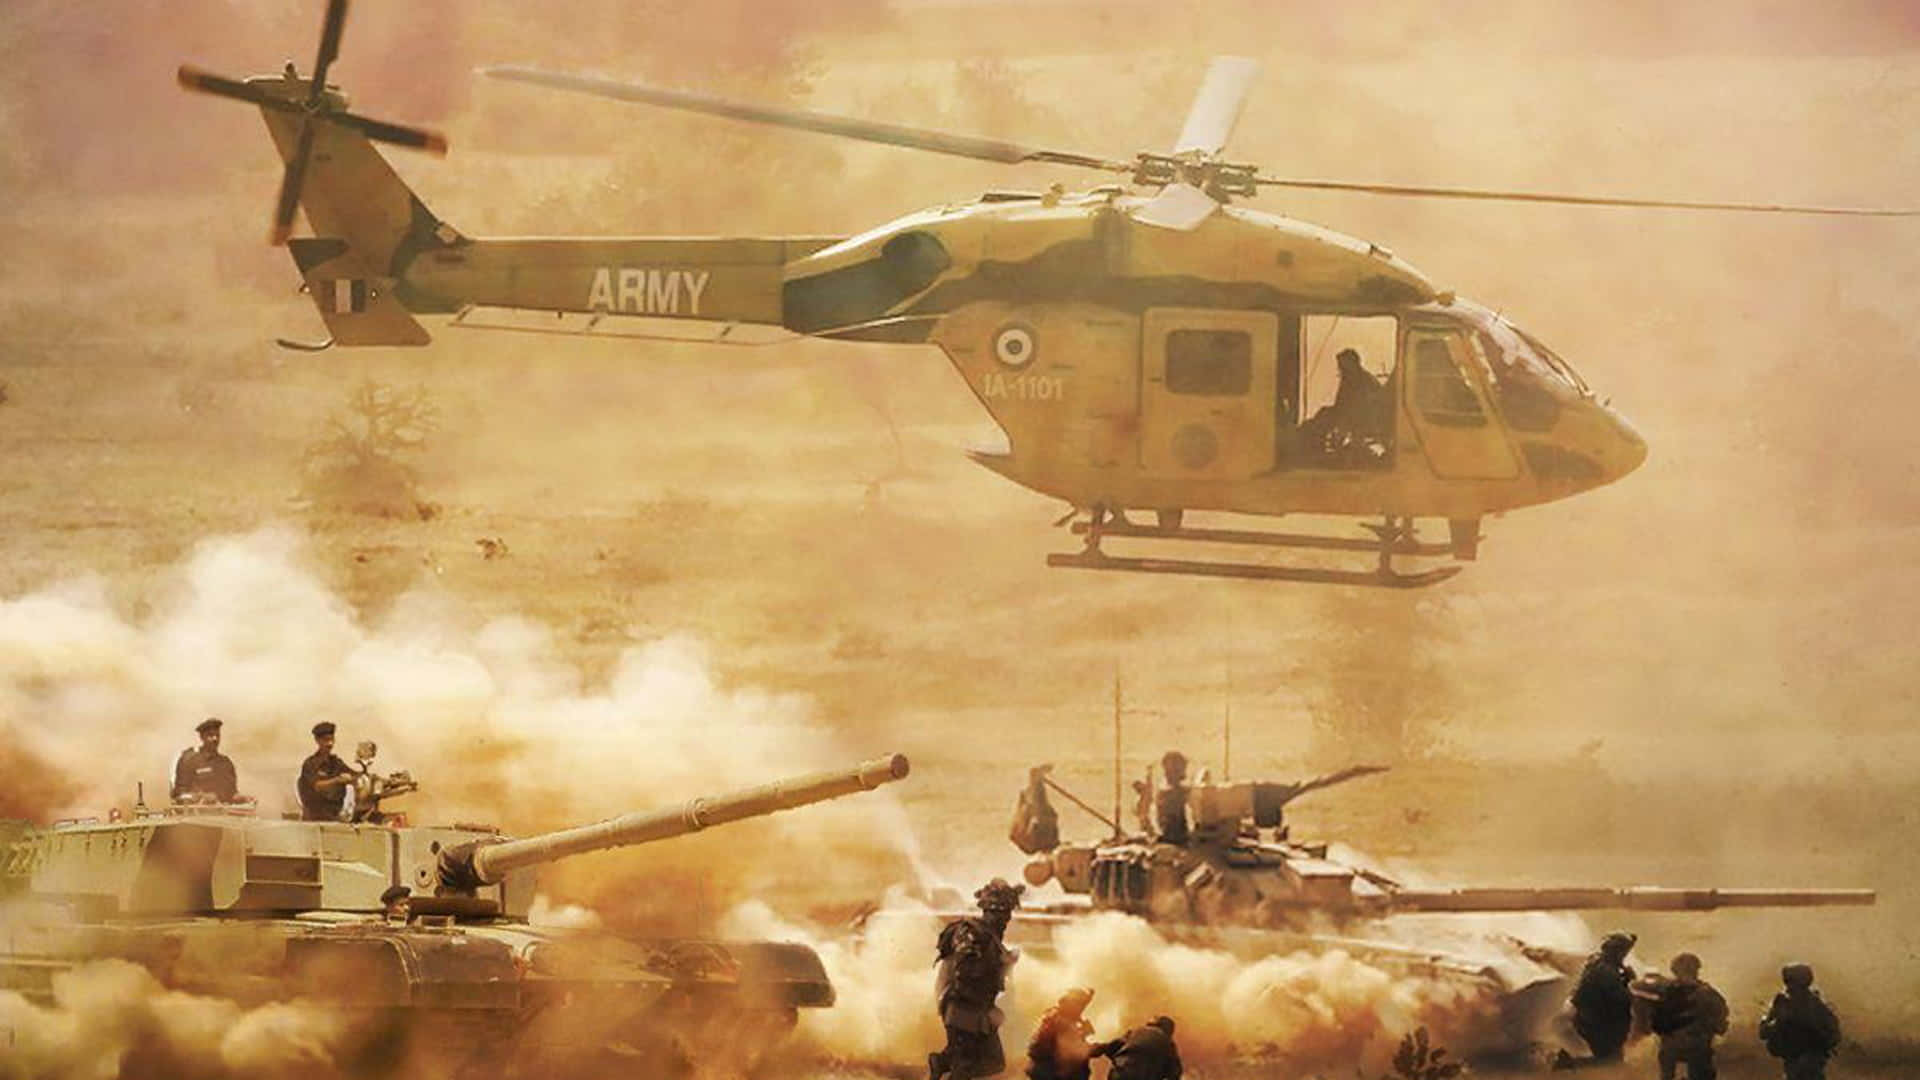 A Helicopter Is Flying Over A Group Of Soldiers And Tanks